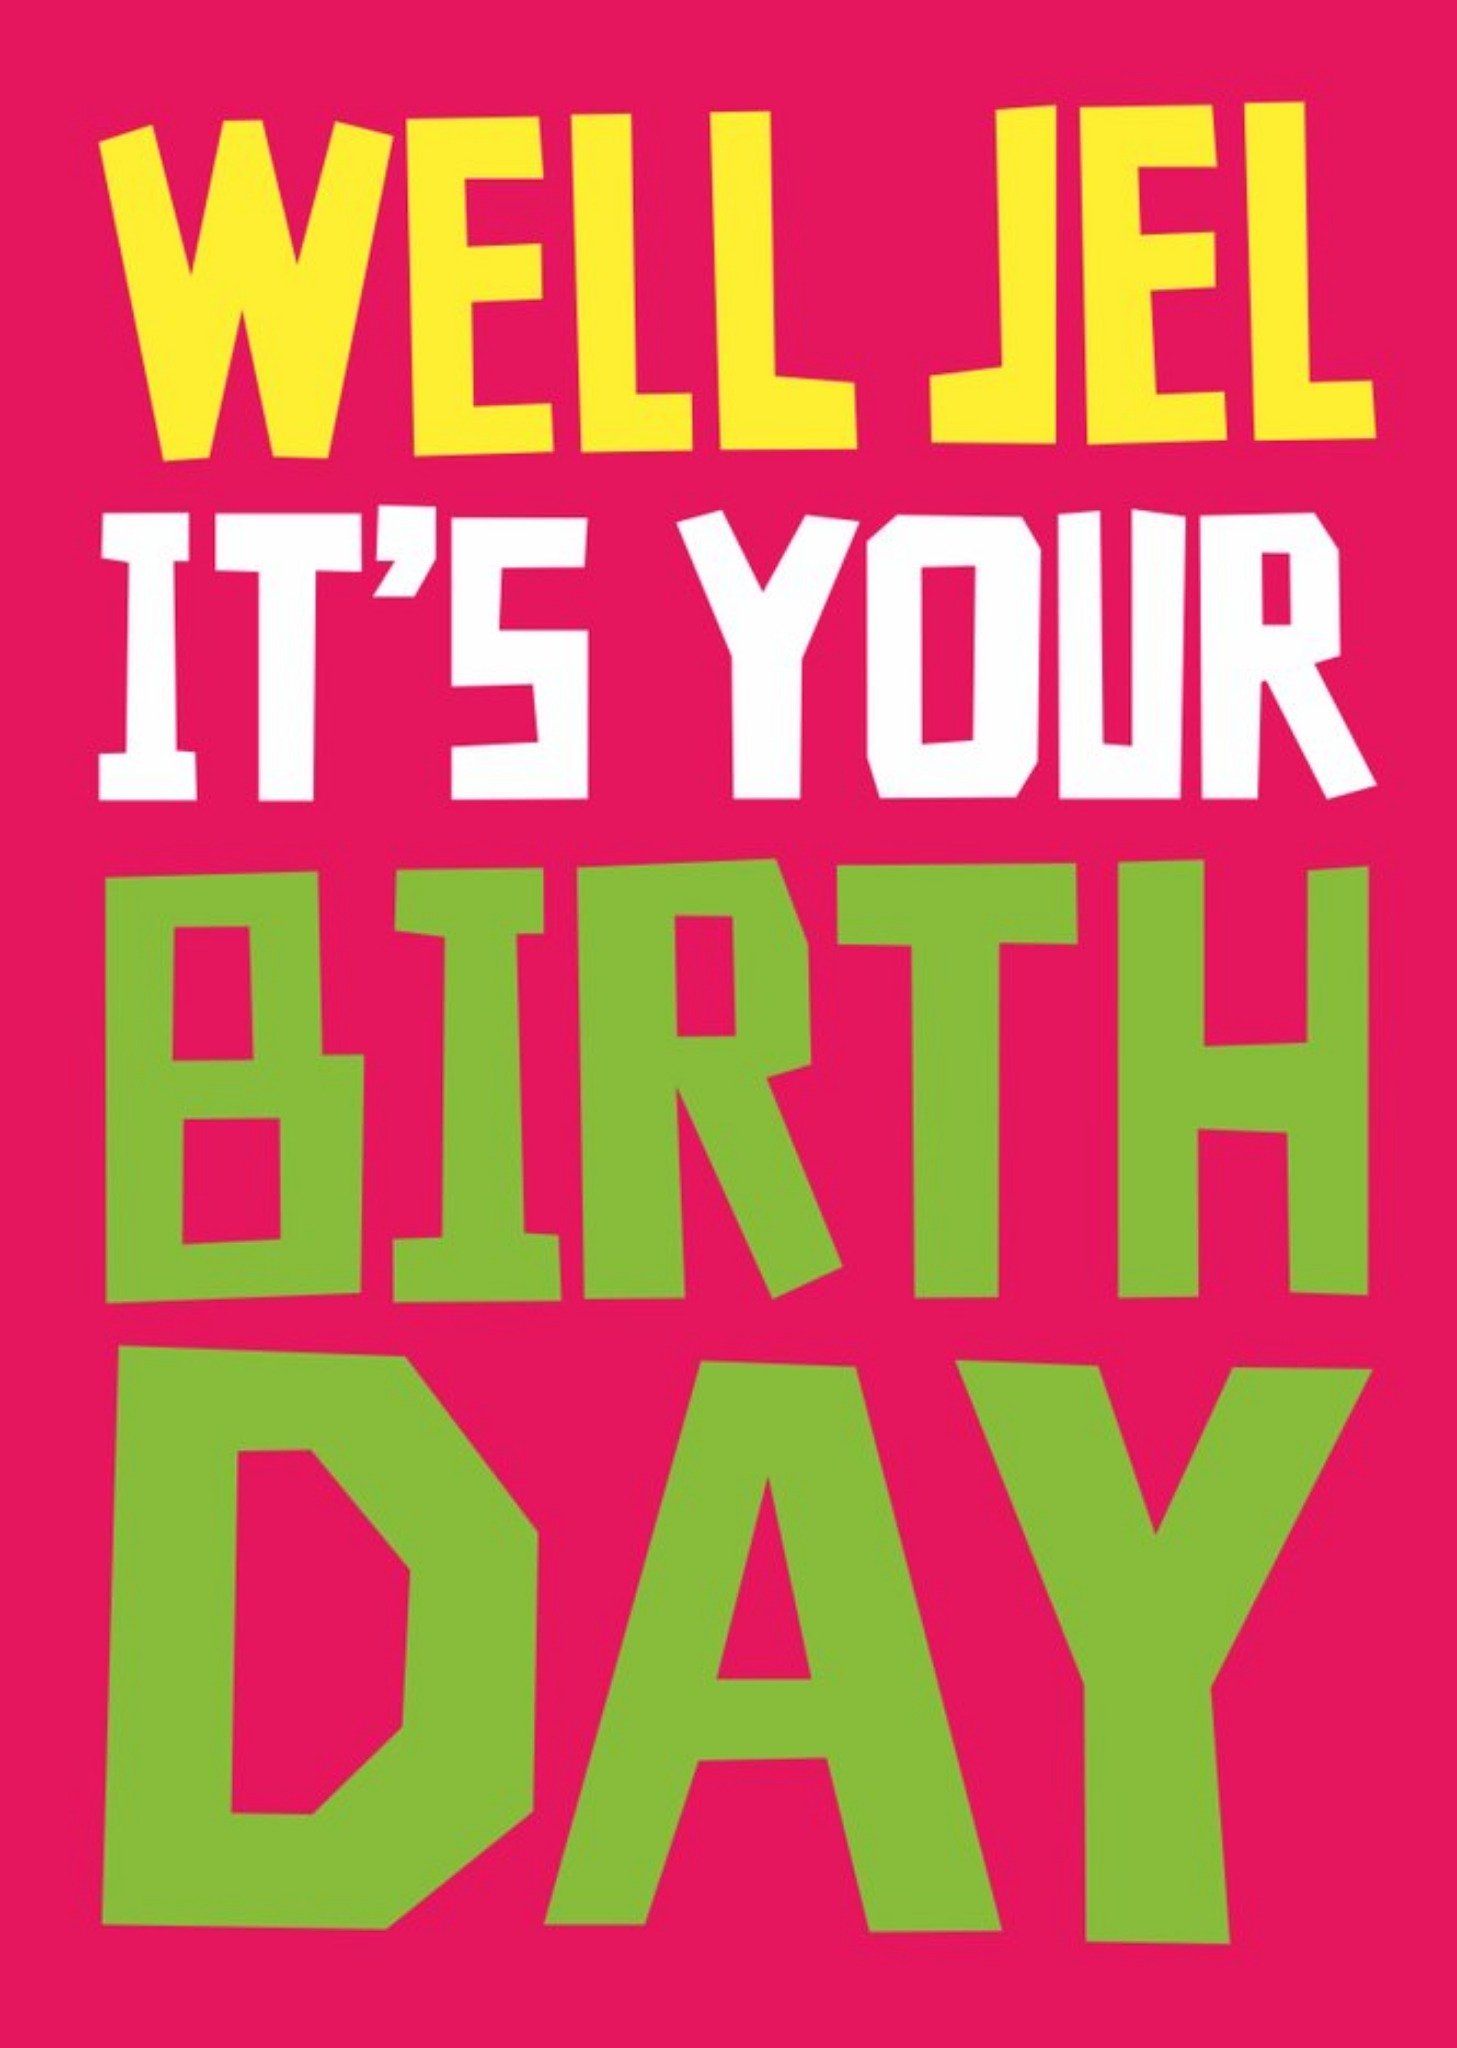 Moonpig Typographic Funny Well Jel Its Your Birthday Card, Large